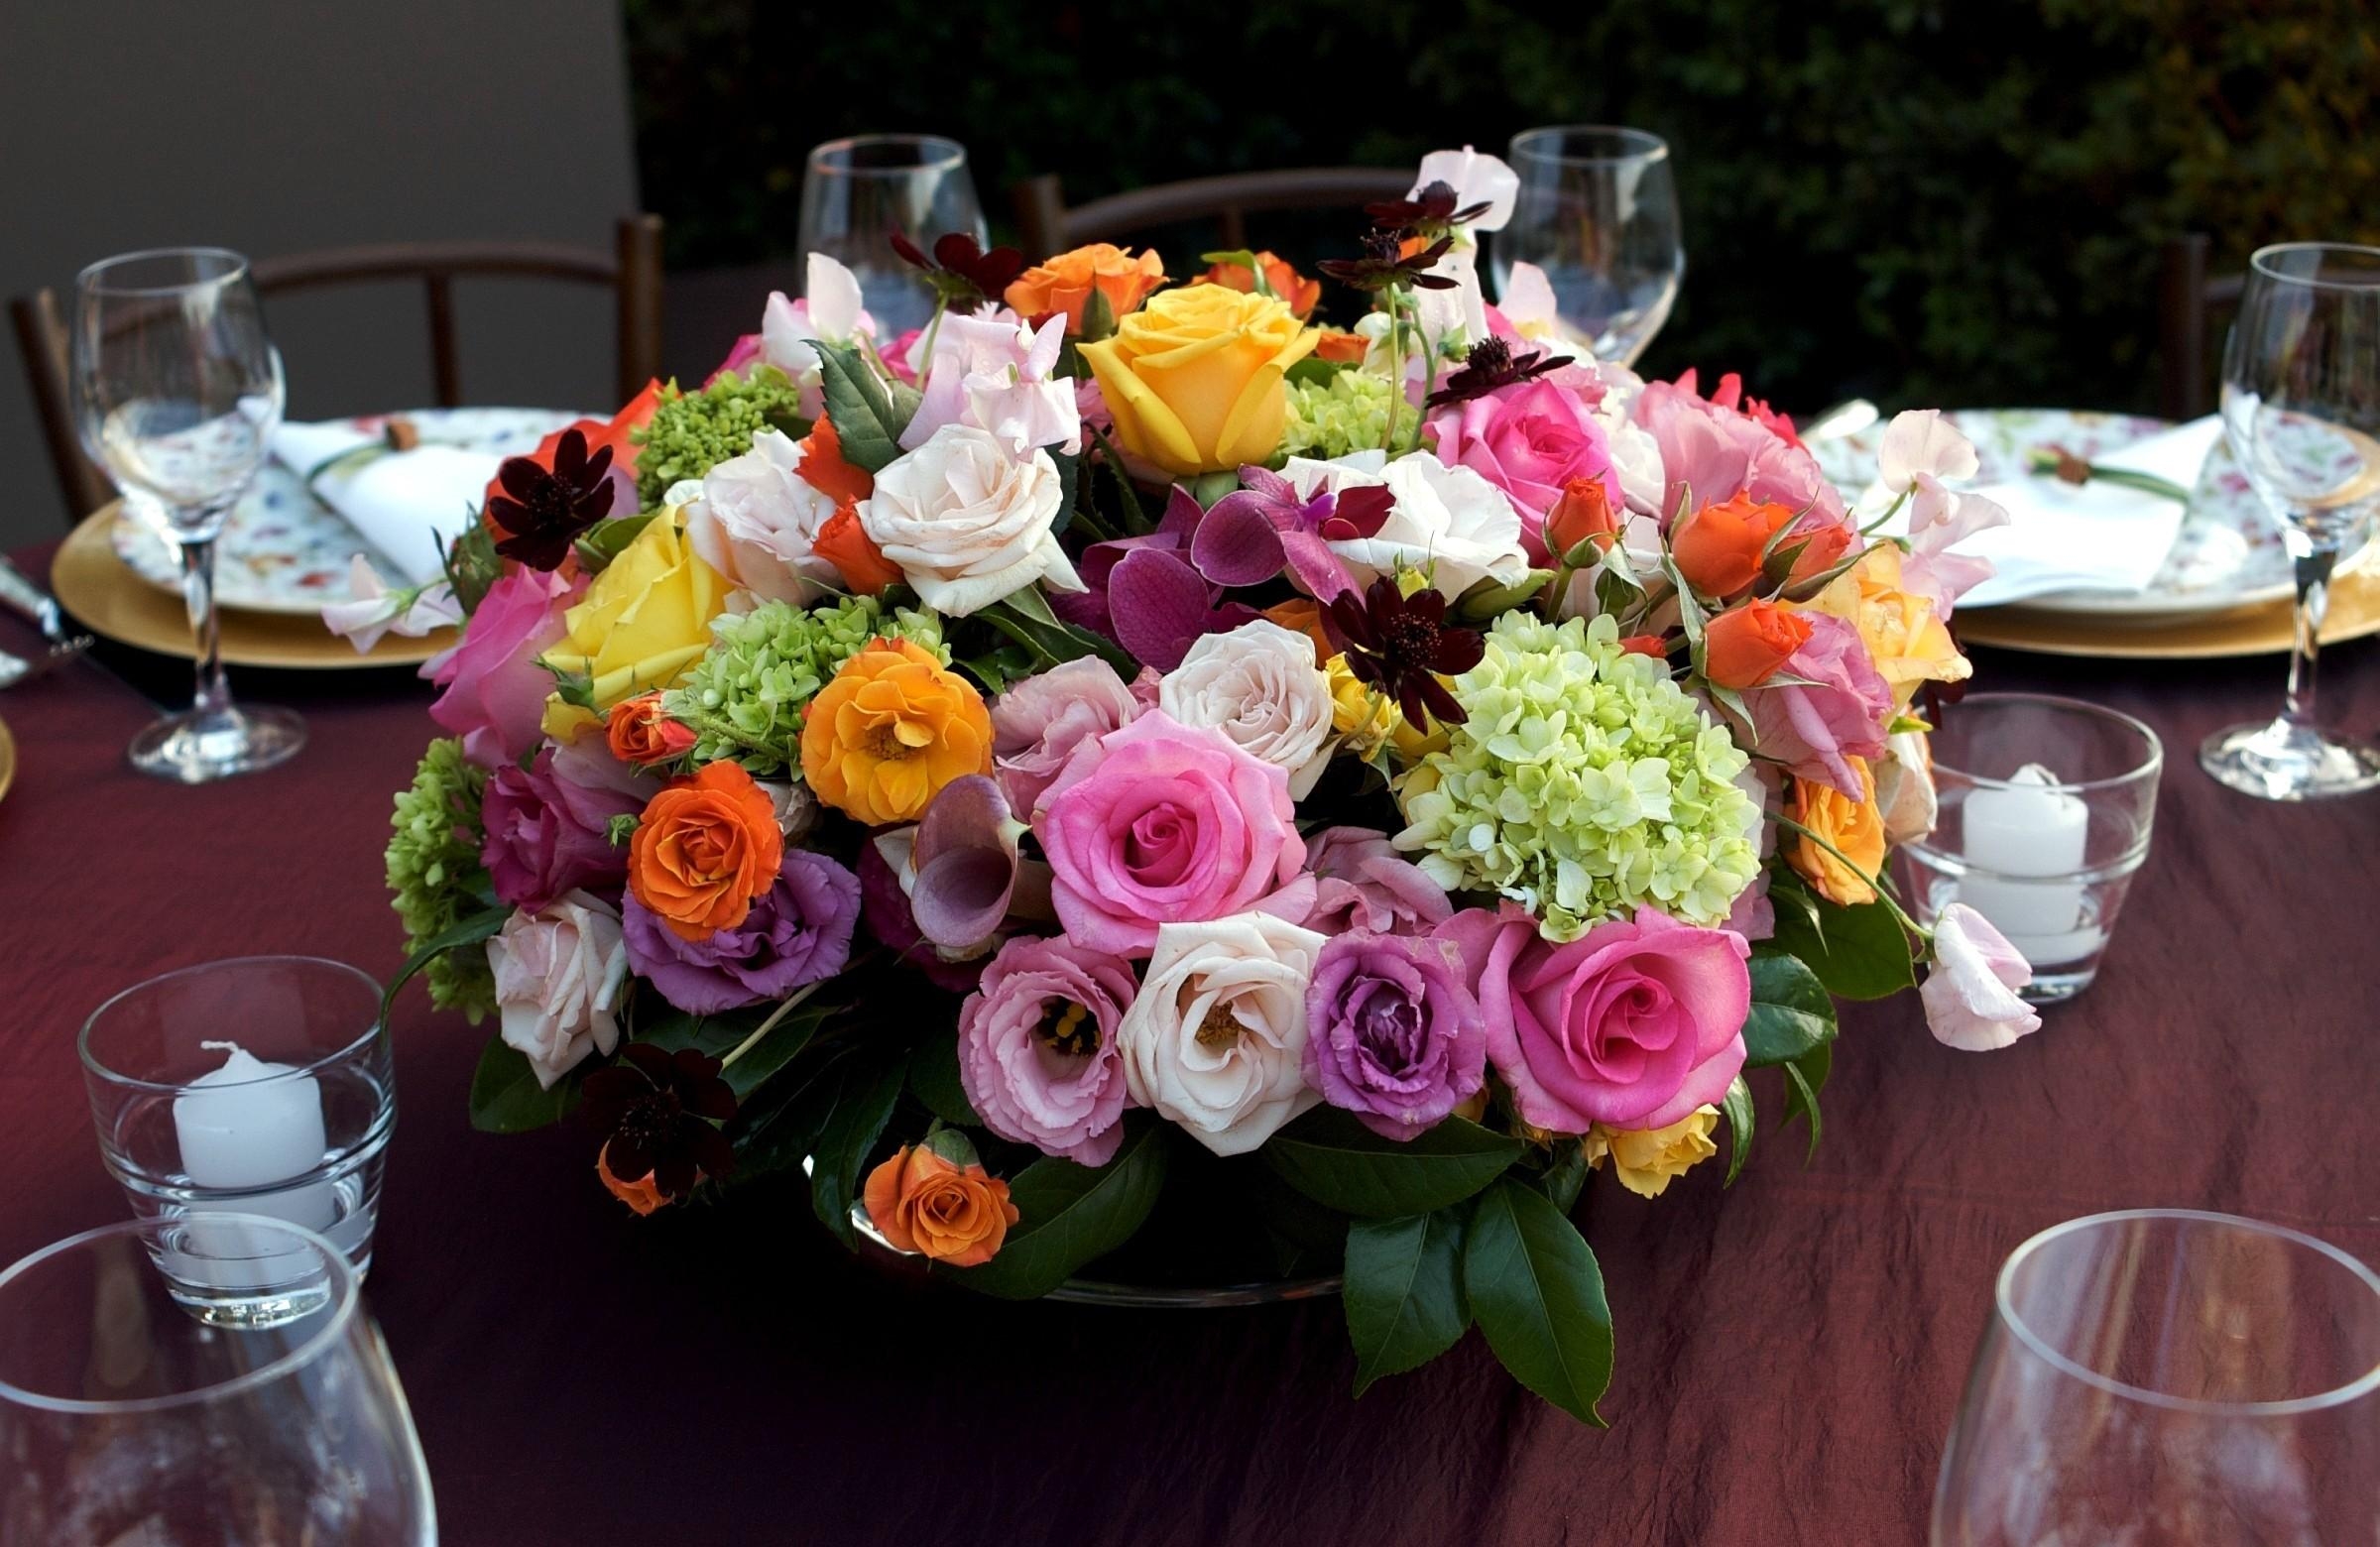 flowers, roses, candles, bouquet, table, composition, hydrangea, serving, lisianthus russell, lisiantus russell